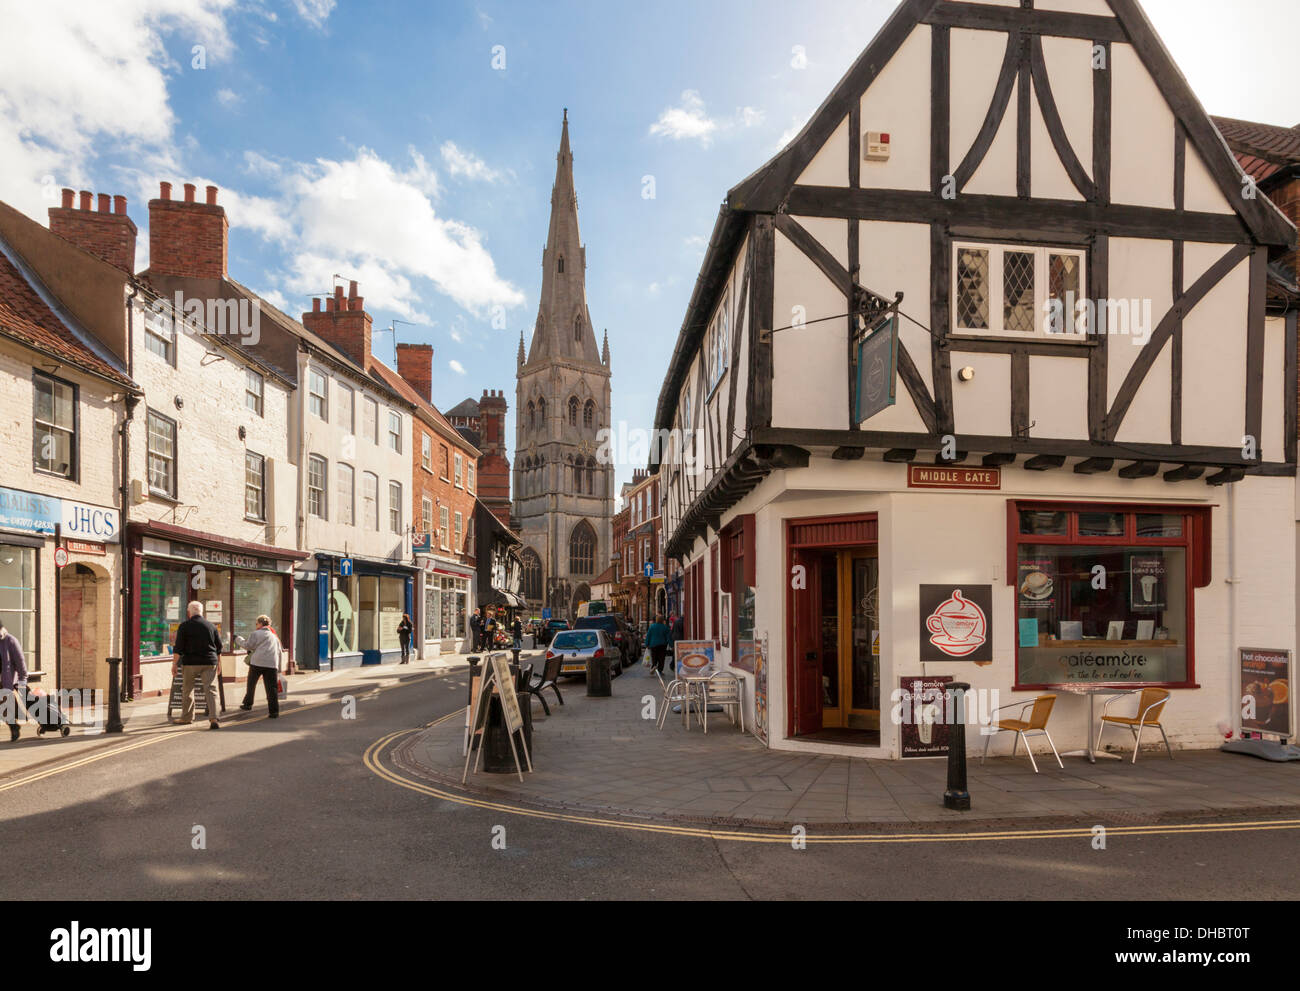 A view along Kirkgate, a shopping street in the old town of Newark on Trent, Nottinghamshire, England, UK Stock Photo